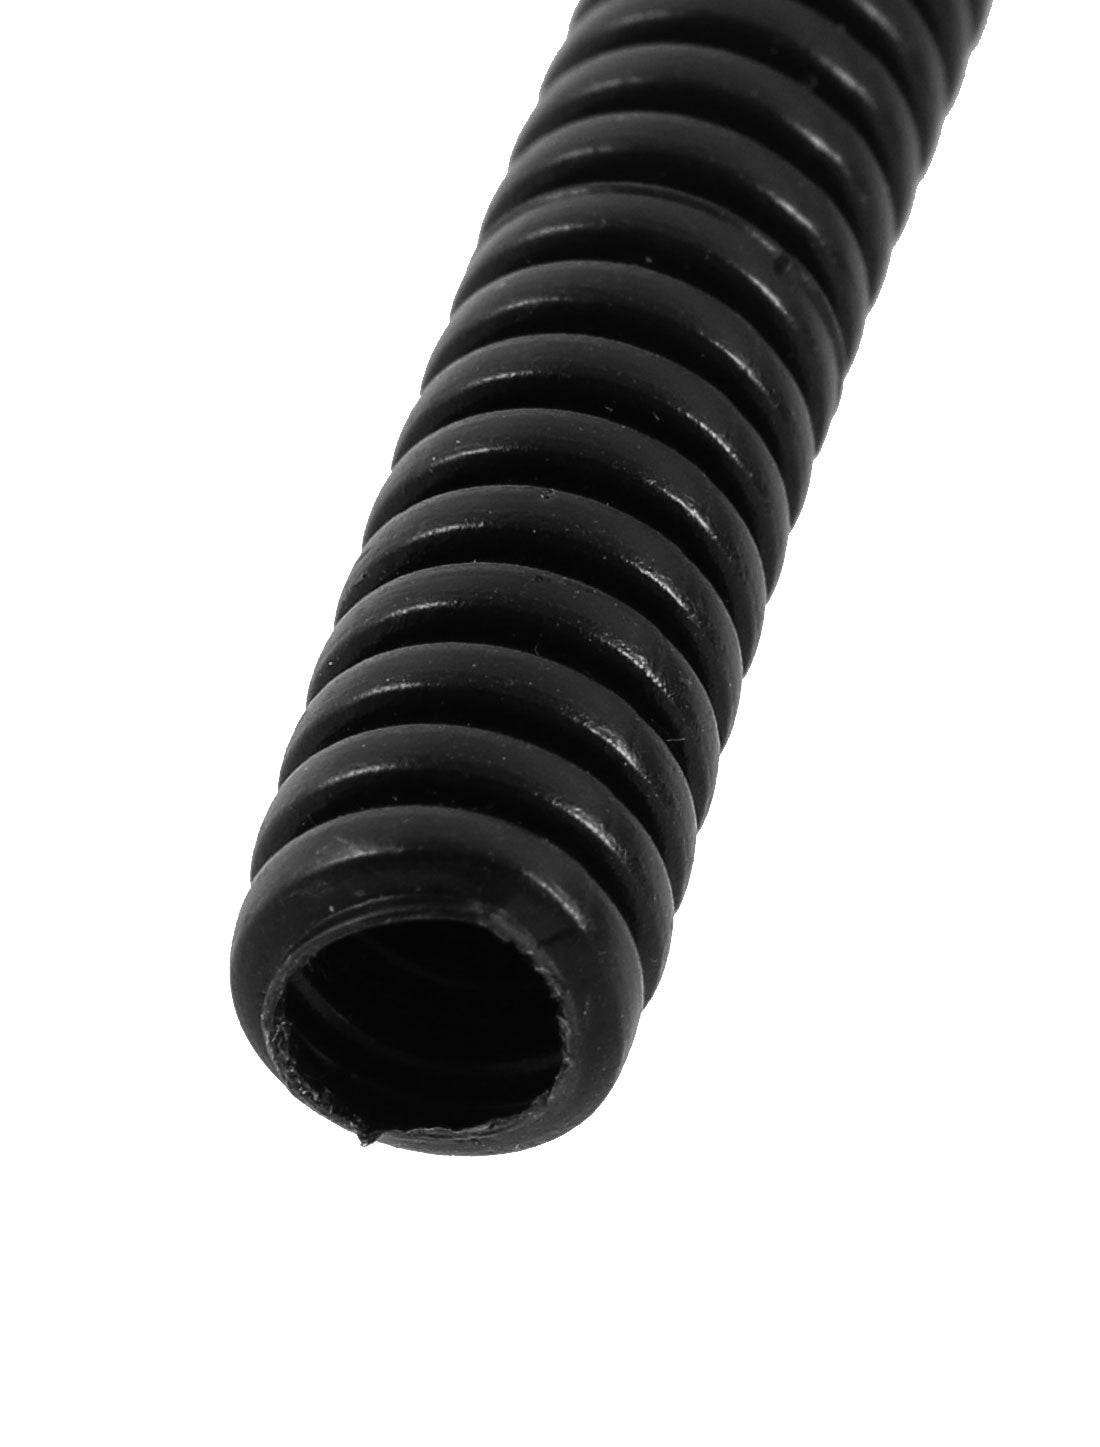 uxcell Uxcell 5.7 M 8 x 10 mm Plastic Flexible Corrugated Conduit Tube for Garden,Office Black